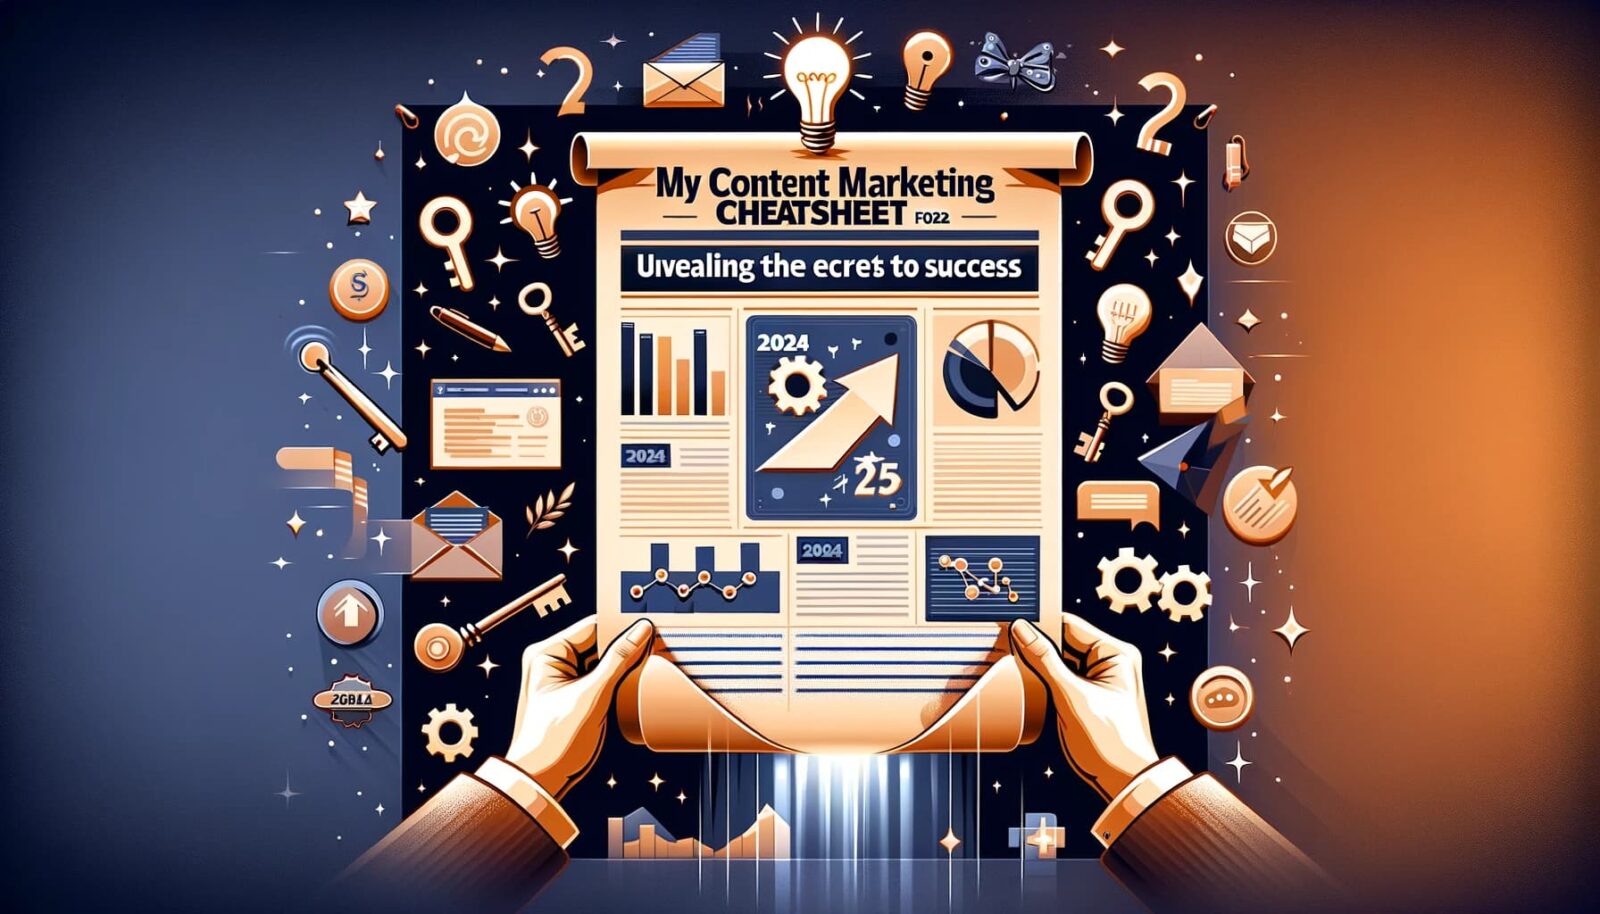 “My Content Marketing Cheatsheet for 2024_ Unveiling the Secrets to Success